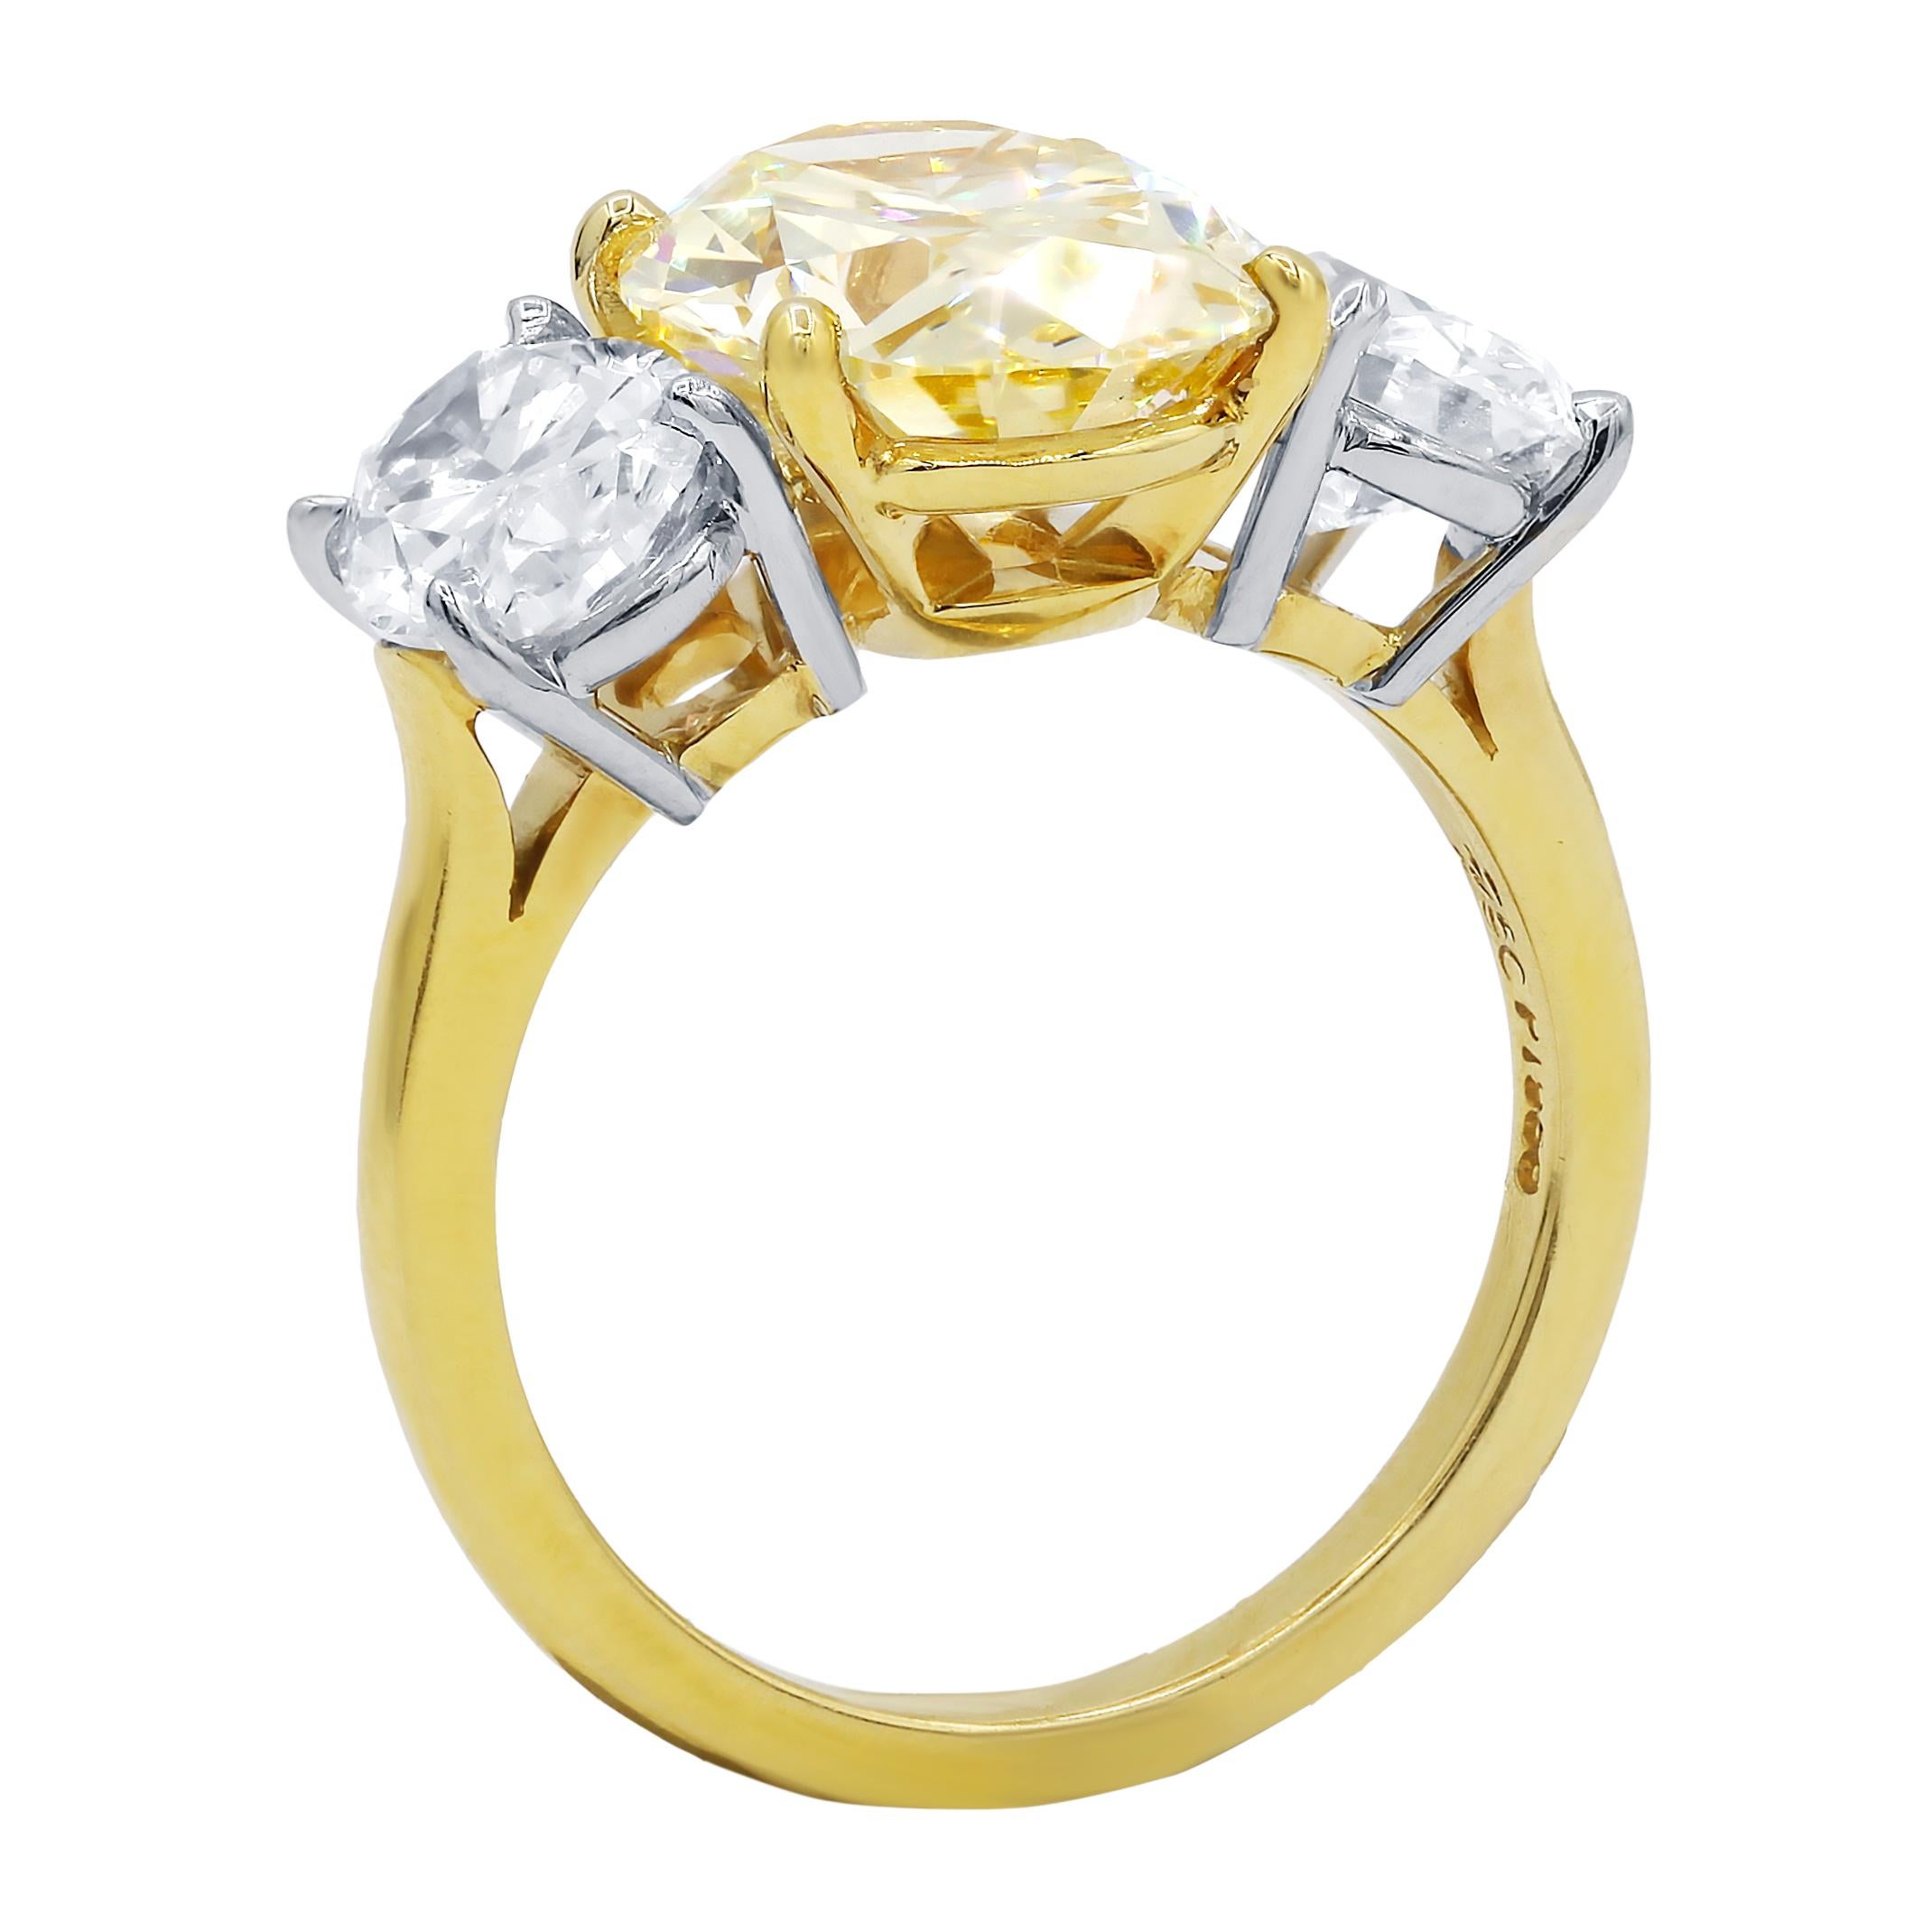 18kt engagement ring with 4.17ct oval fancy yellow vsi gia (ovc250) and 2 side white diaminds 1.27 (ovc248)jvs2 and 1.33 (ovc249) jvs2 set in yellow gold 
